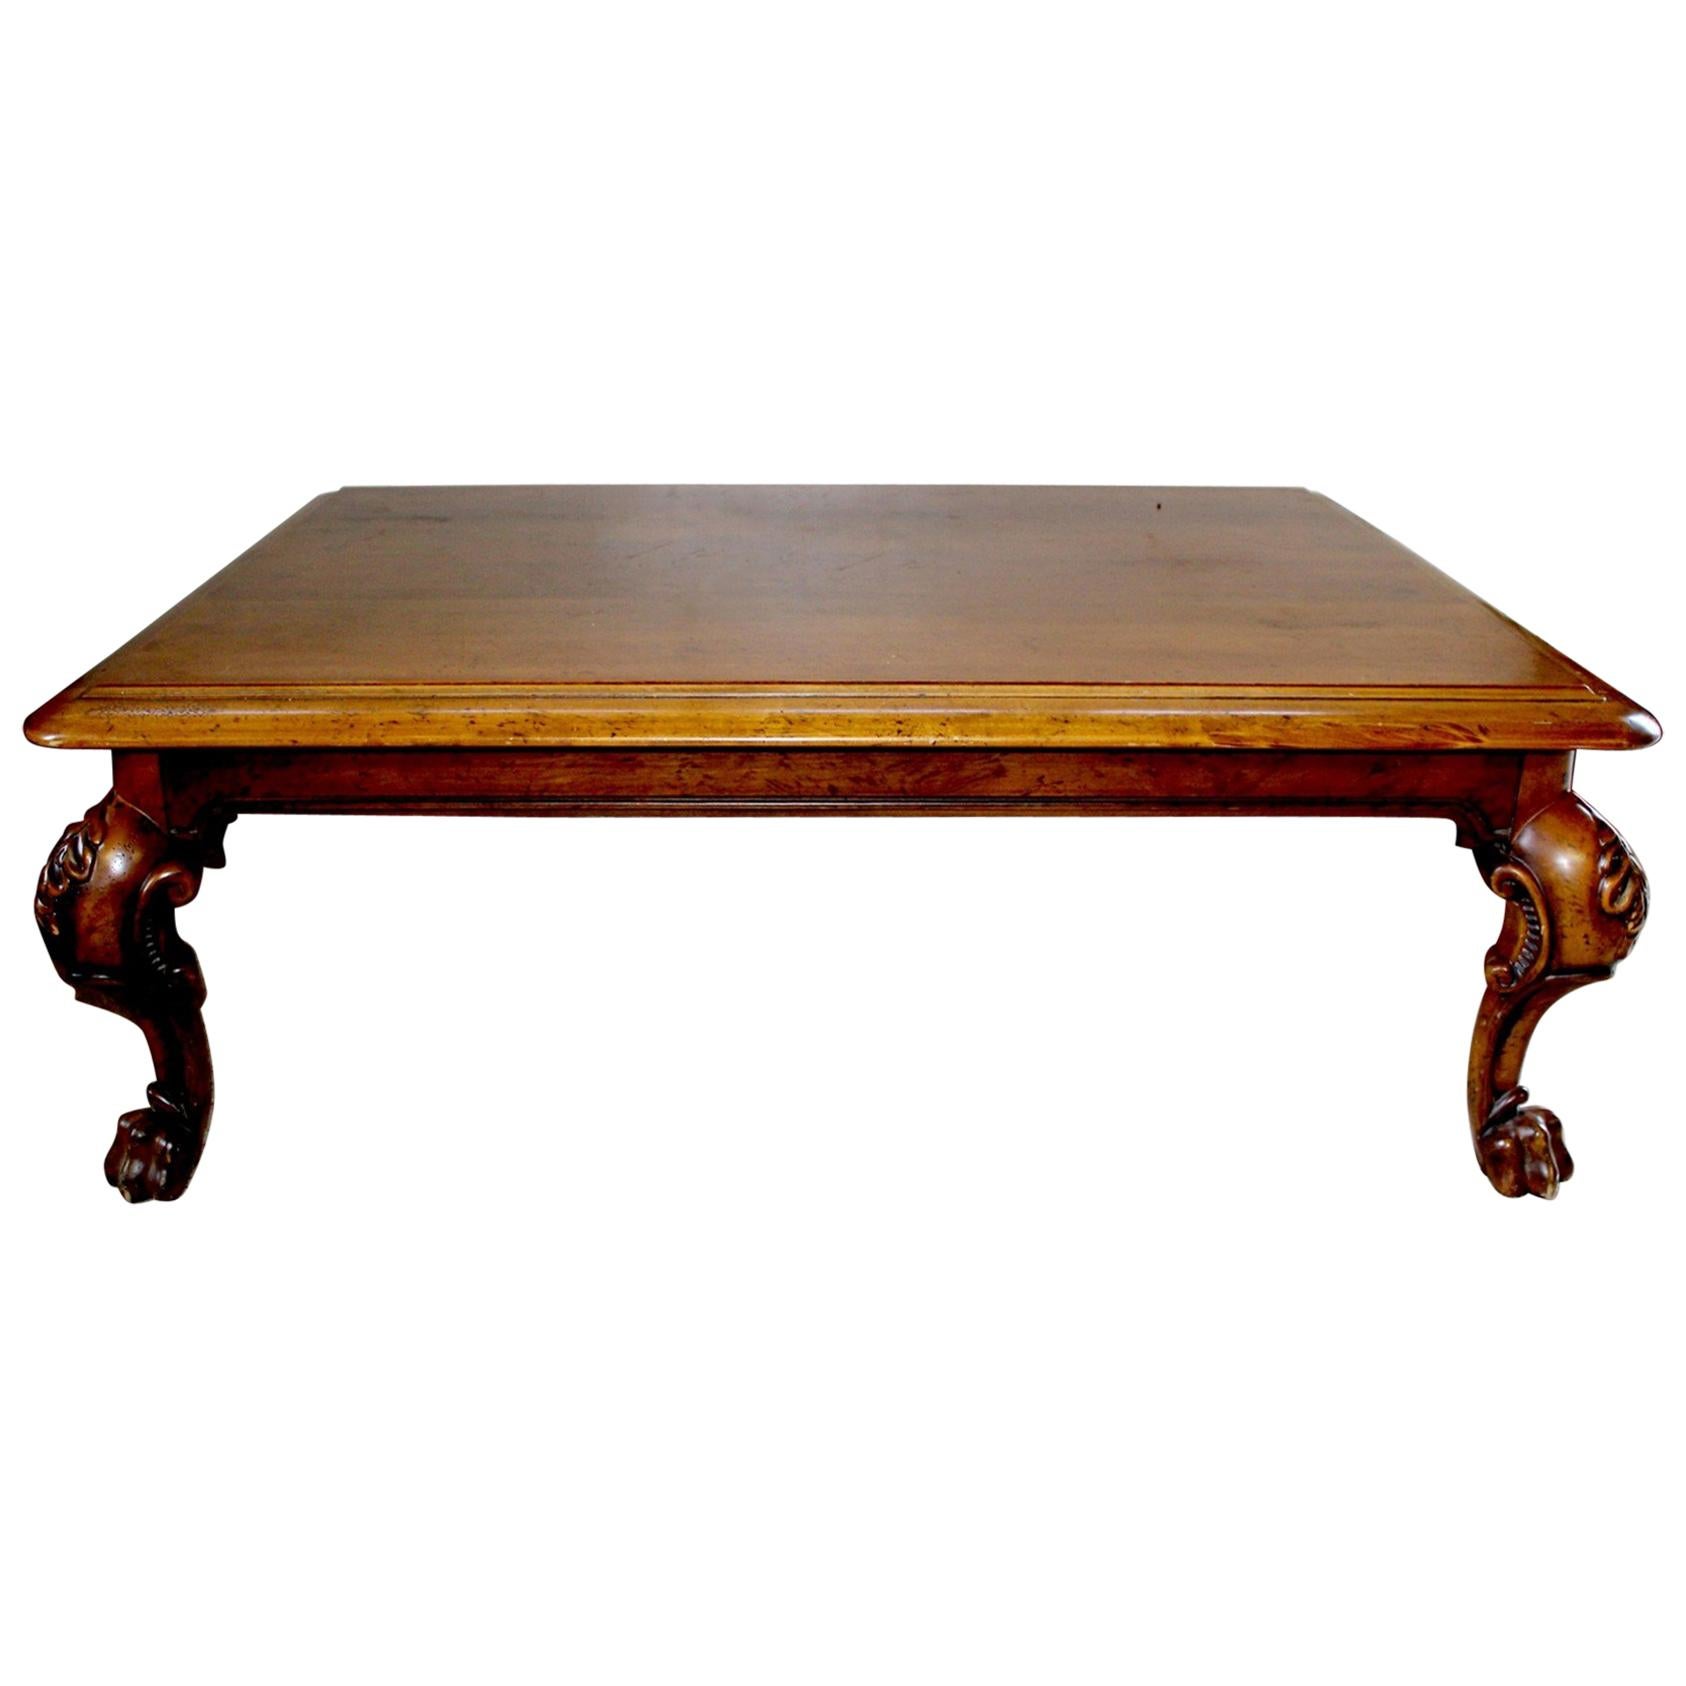 Large Impressive Ralph Lauren Walnut Coffee Table with Carved Wood Base